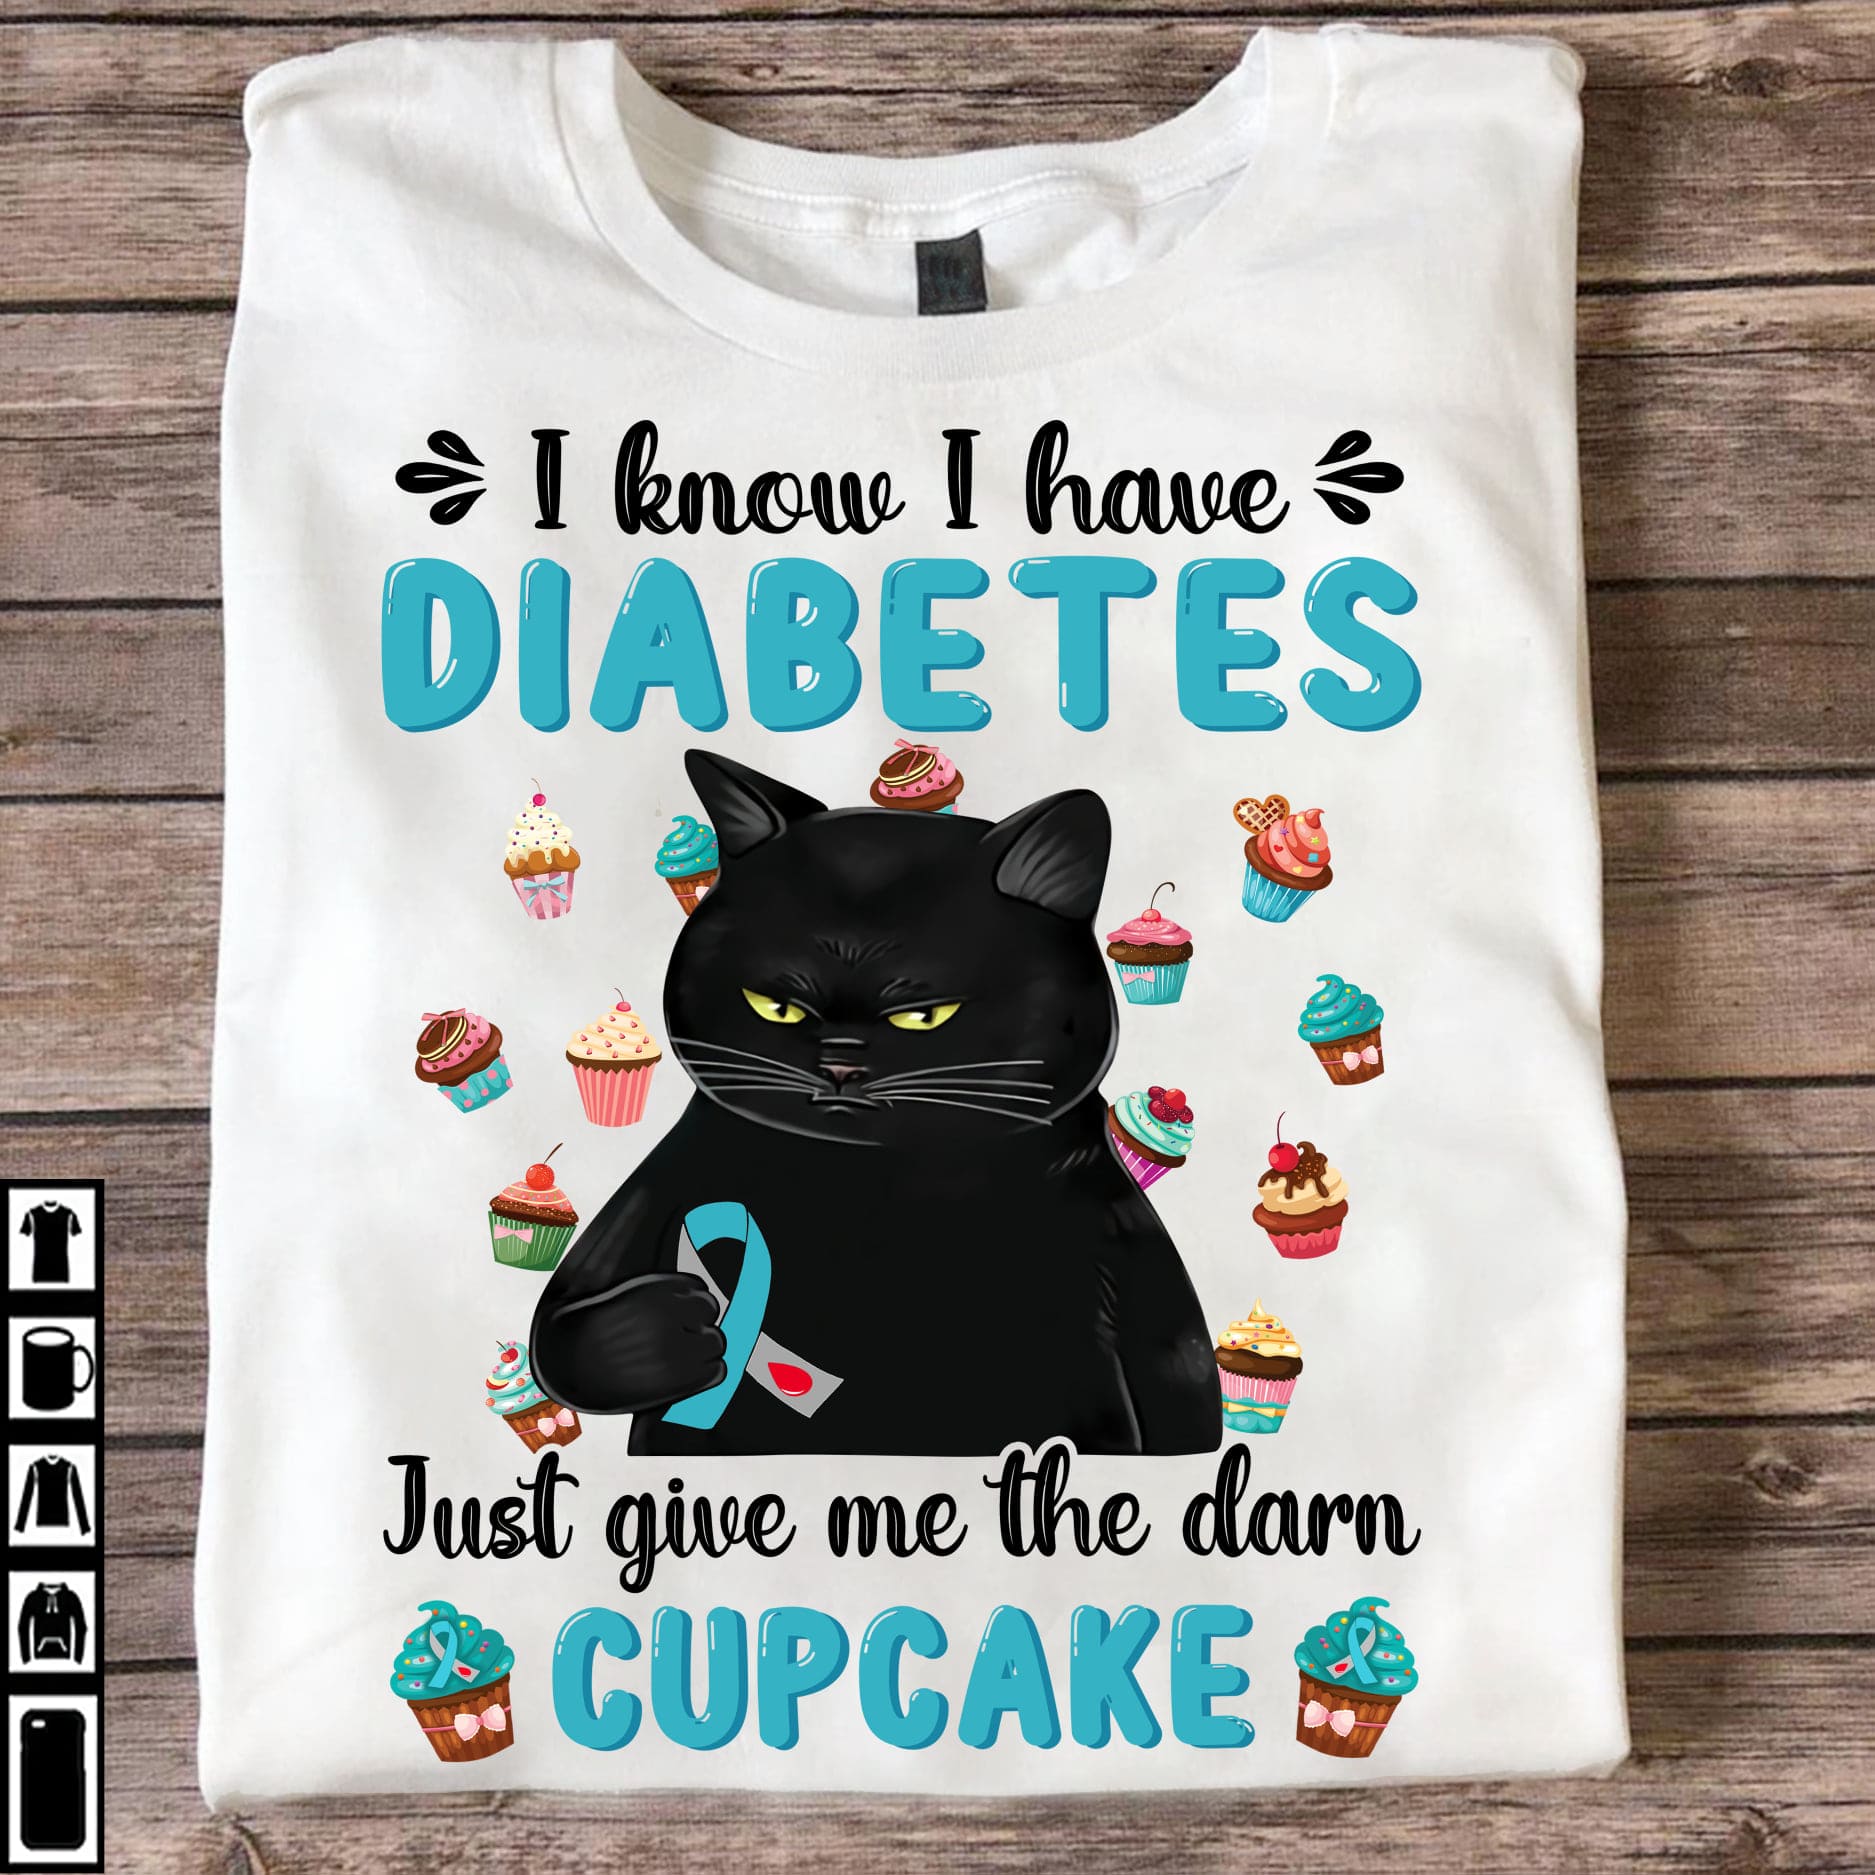 I know I have Diabetes just give me the darn cupcake - Black cat diabetic, Diabetes awareness